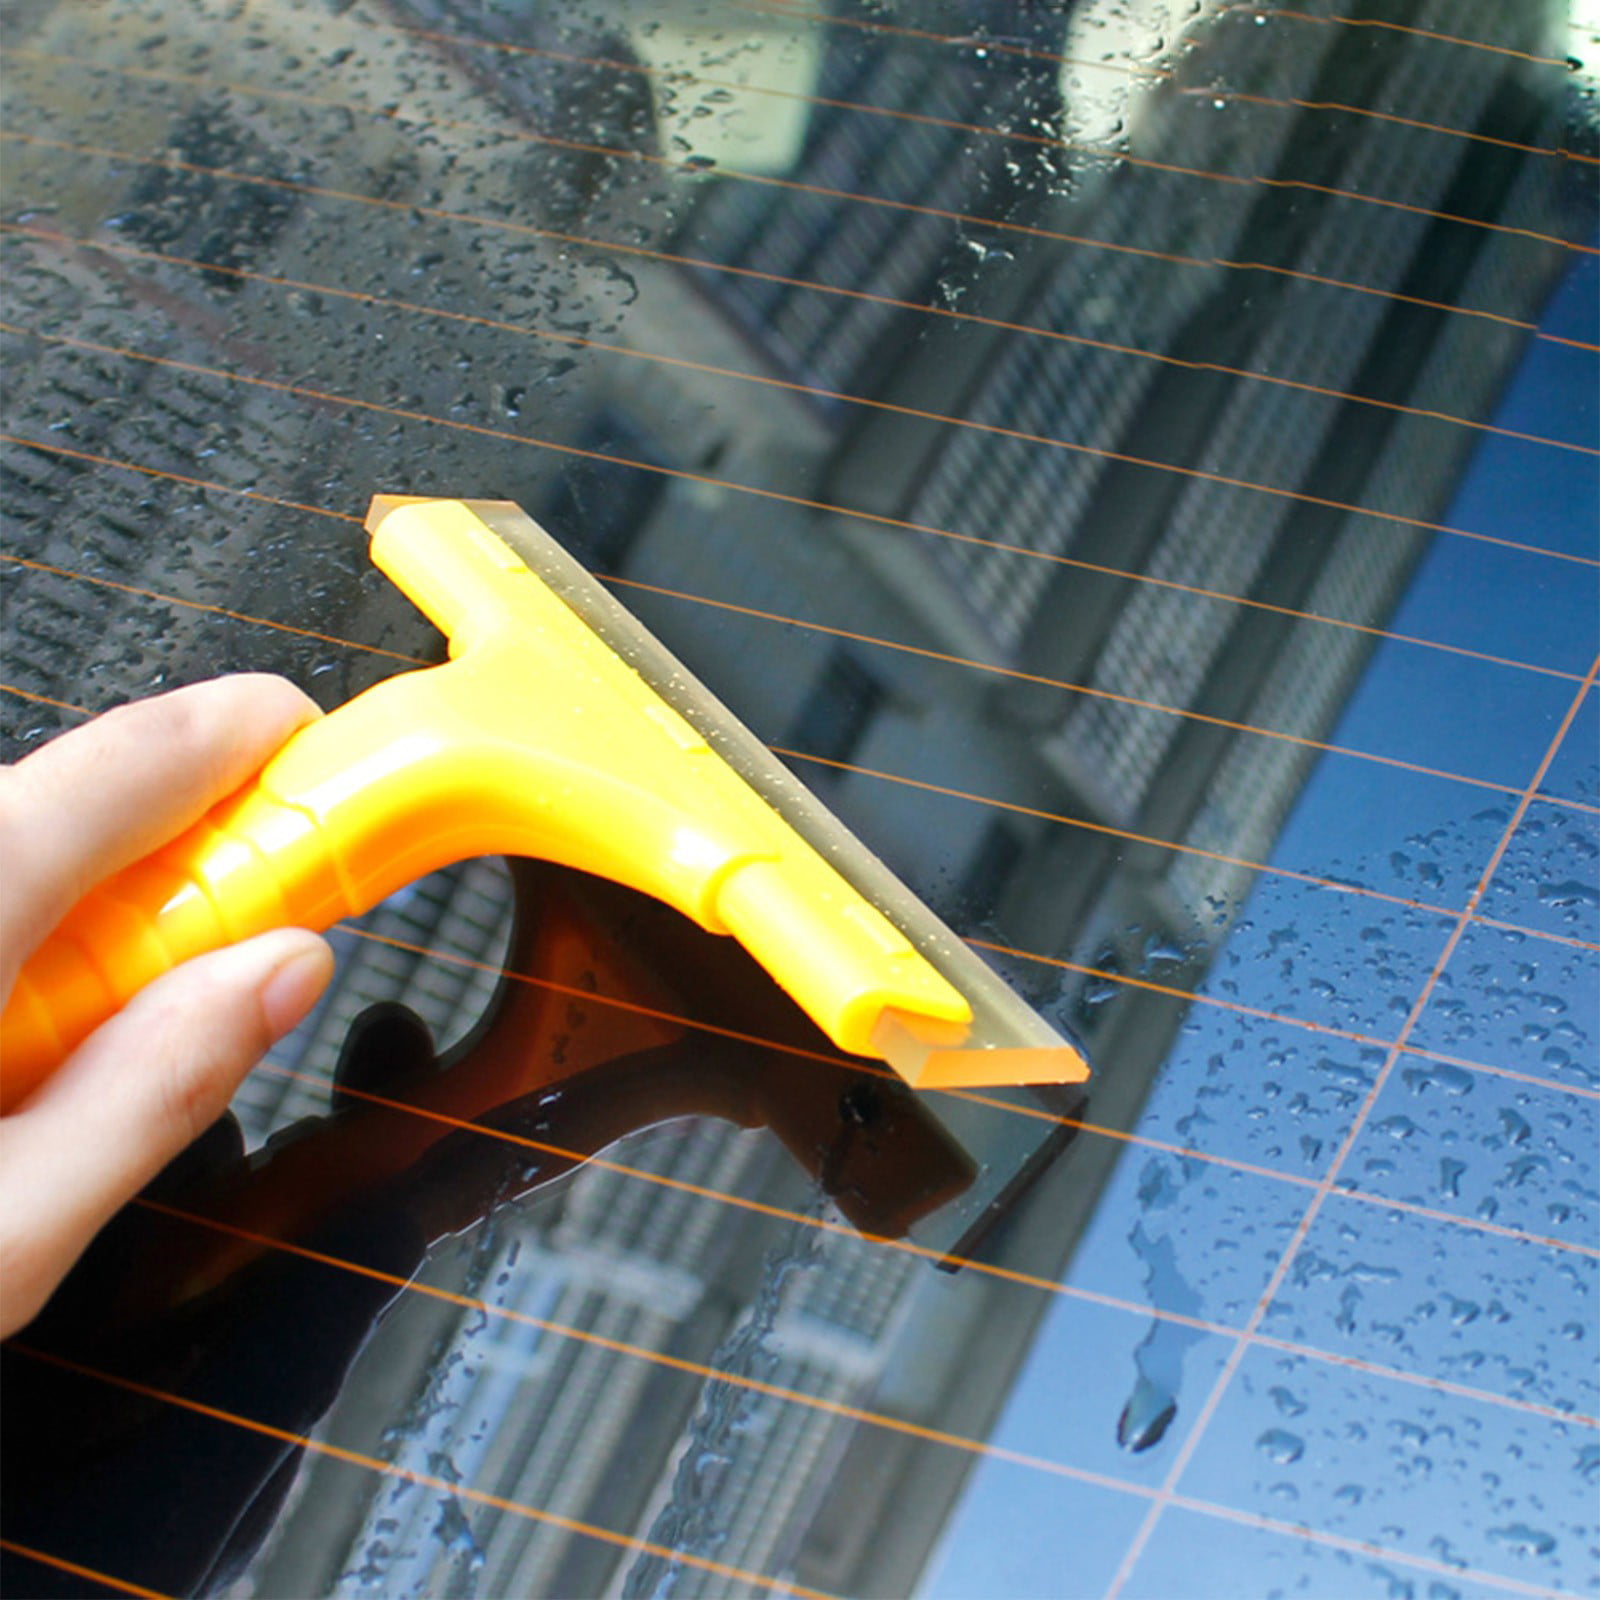 65% off Clearance All-Purpose PP+TPR Materials Shower Squeegee for